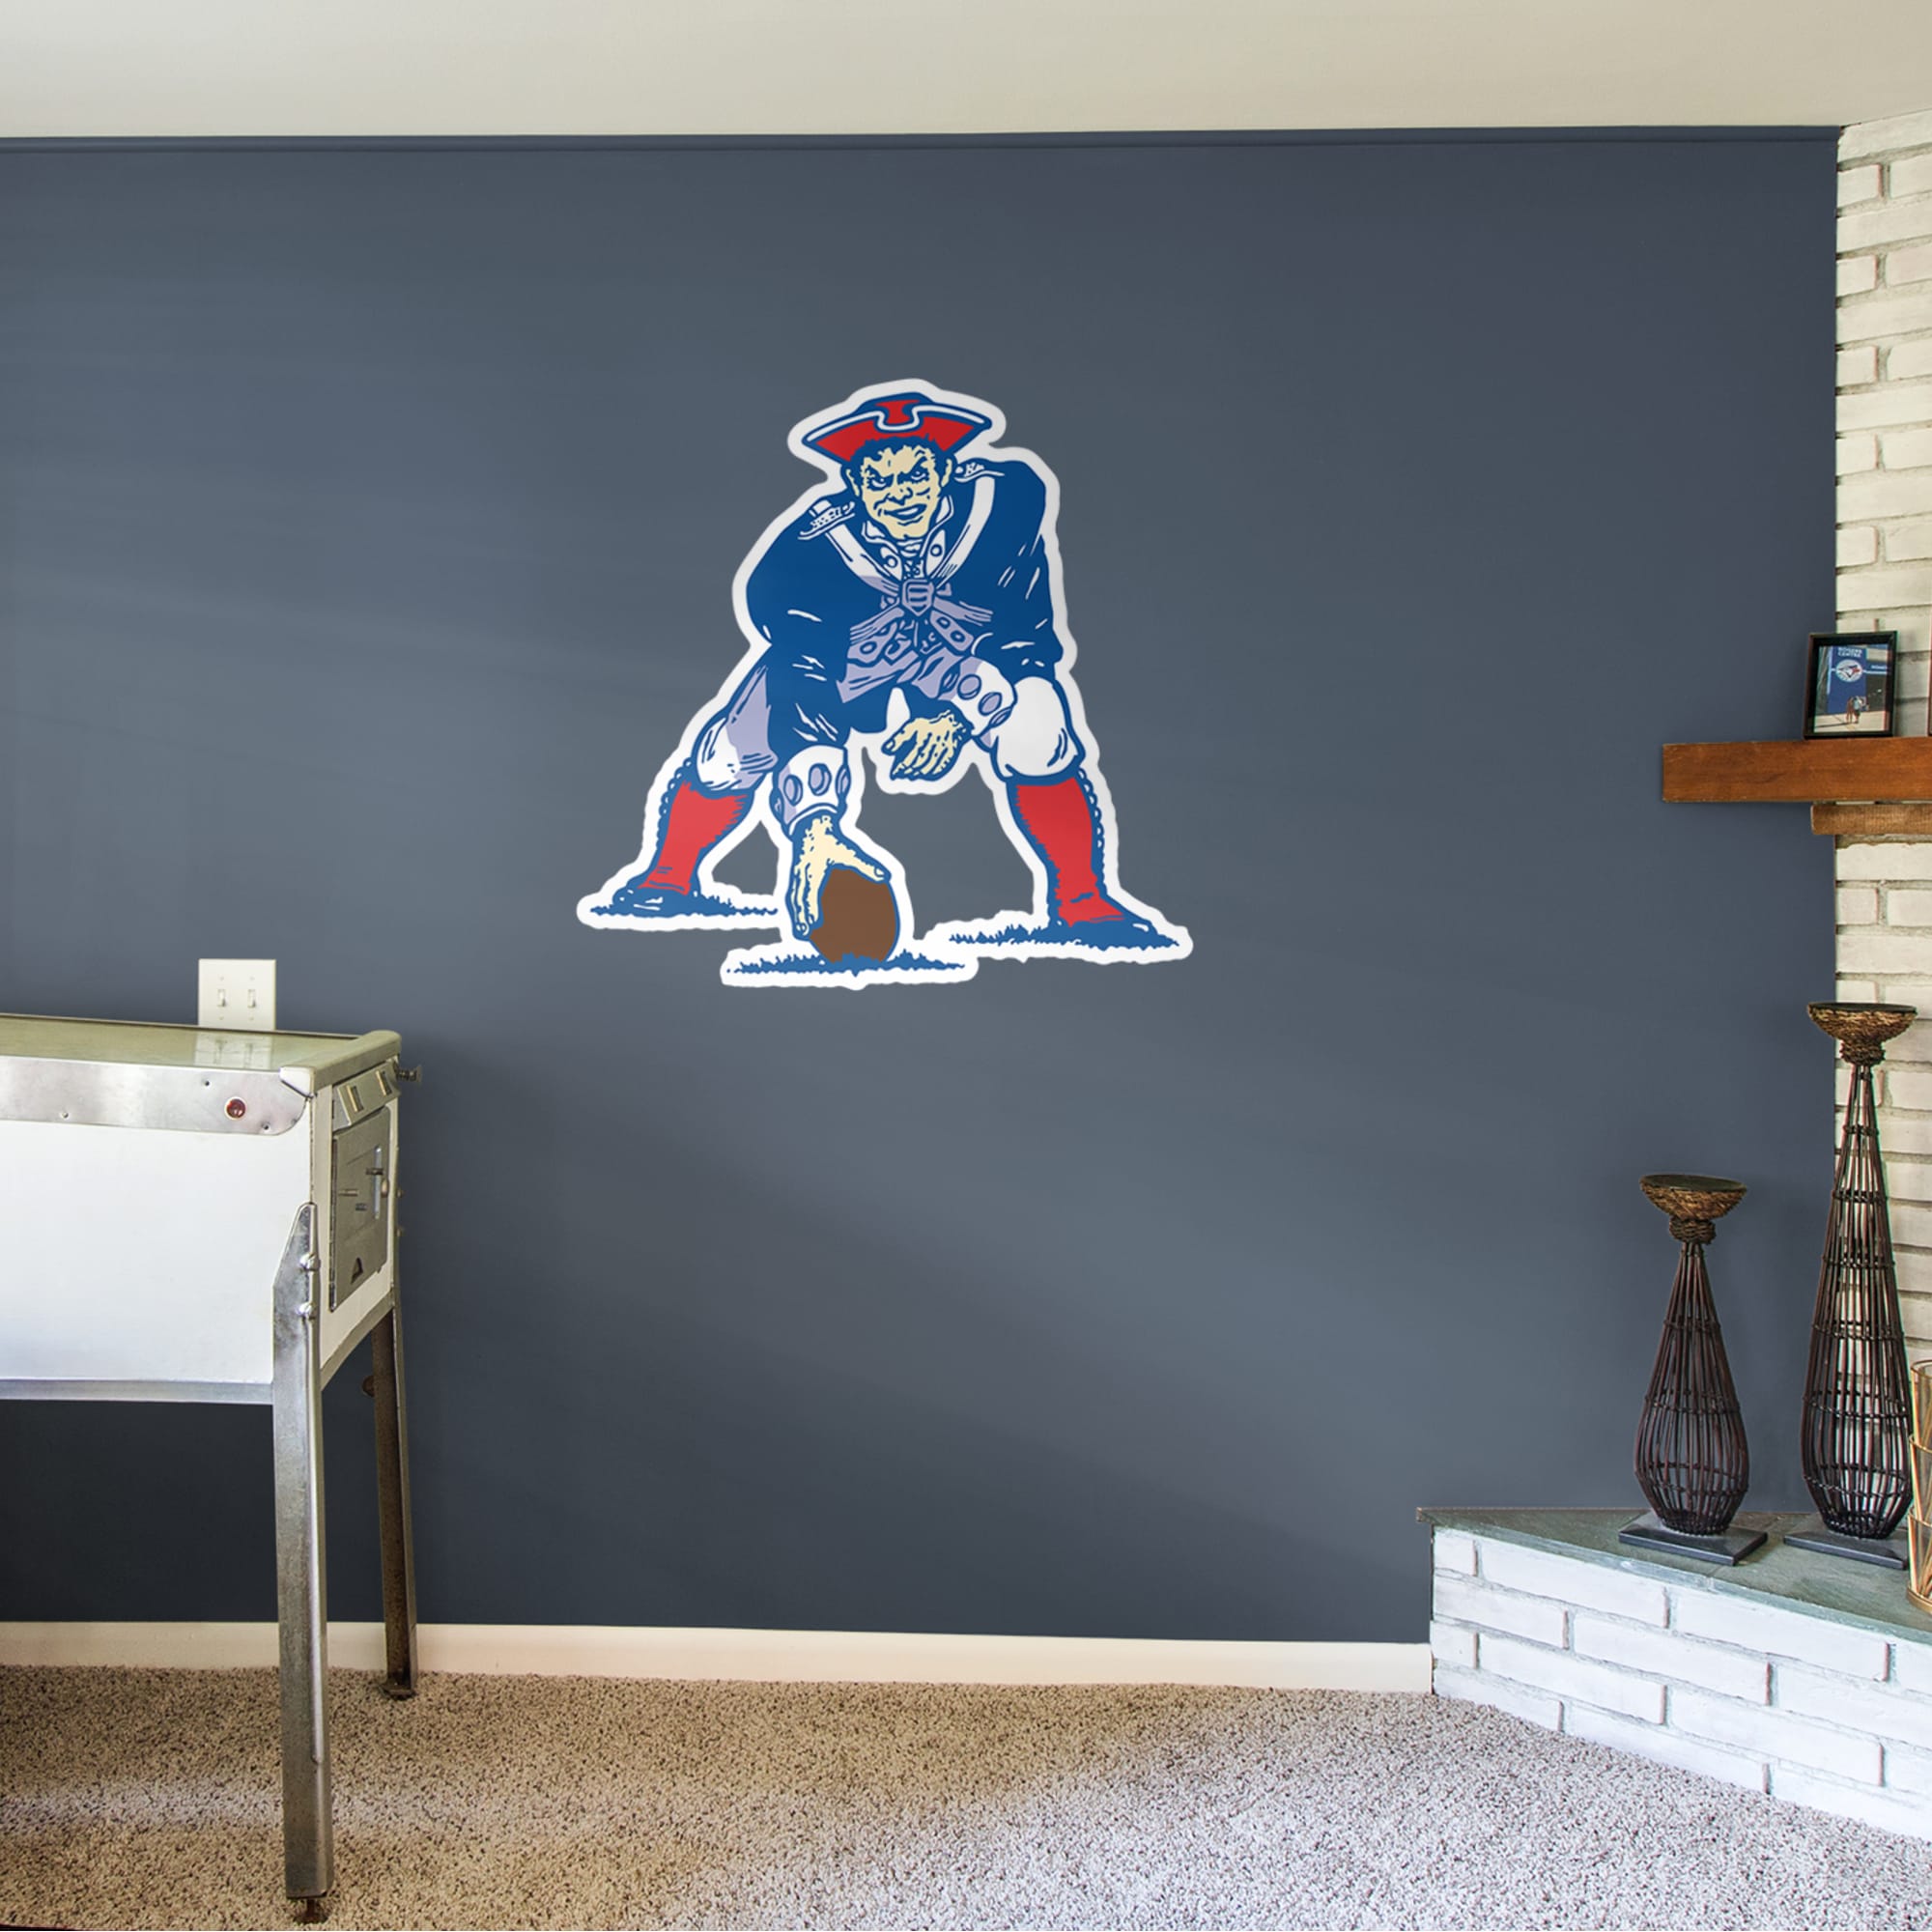 Boston Patriots for New England Patriots: Original AFL Logo - Officially Licensed NFL Removable Wall Decal 39.0"W x 39.0"H by Fa